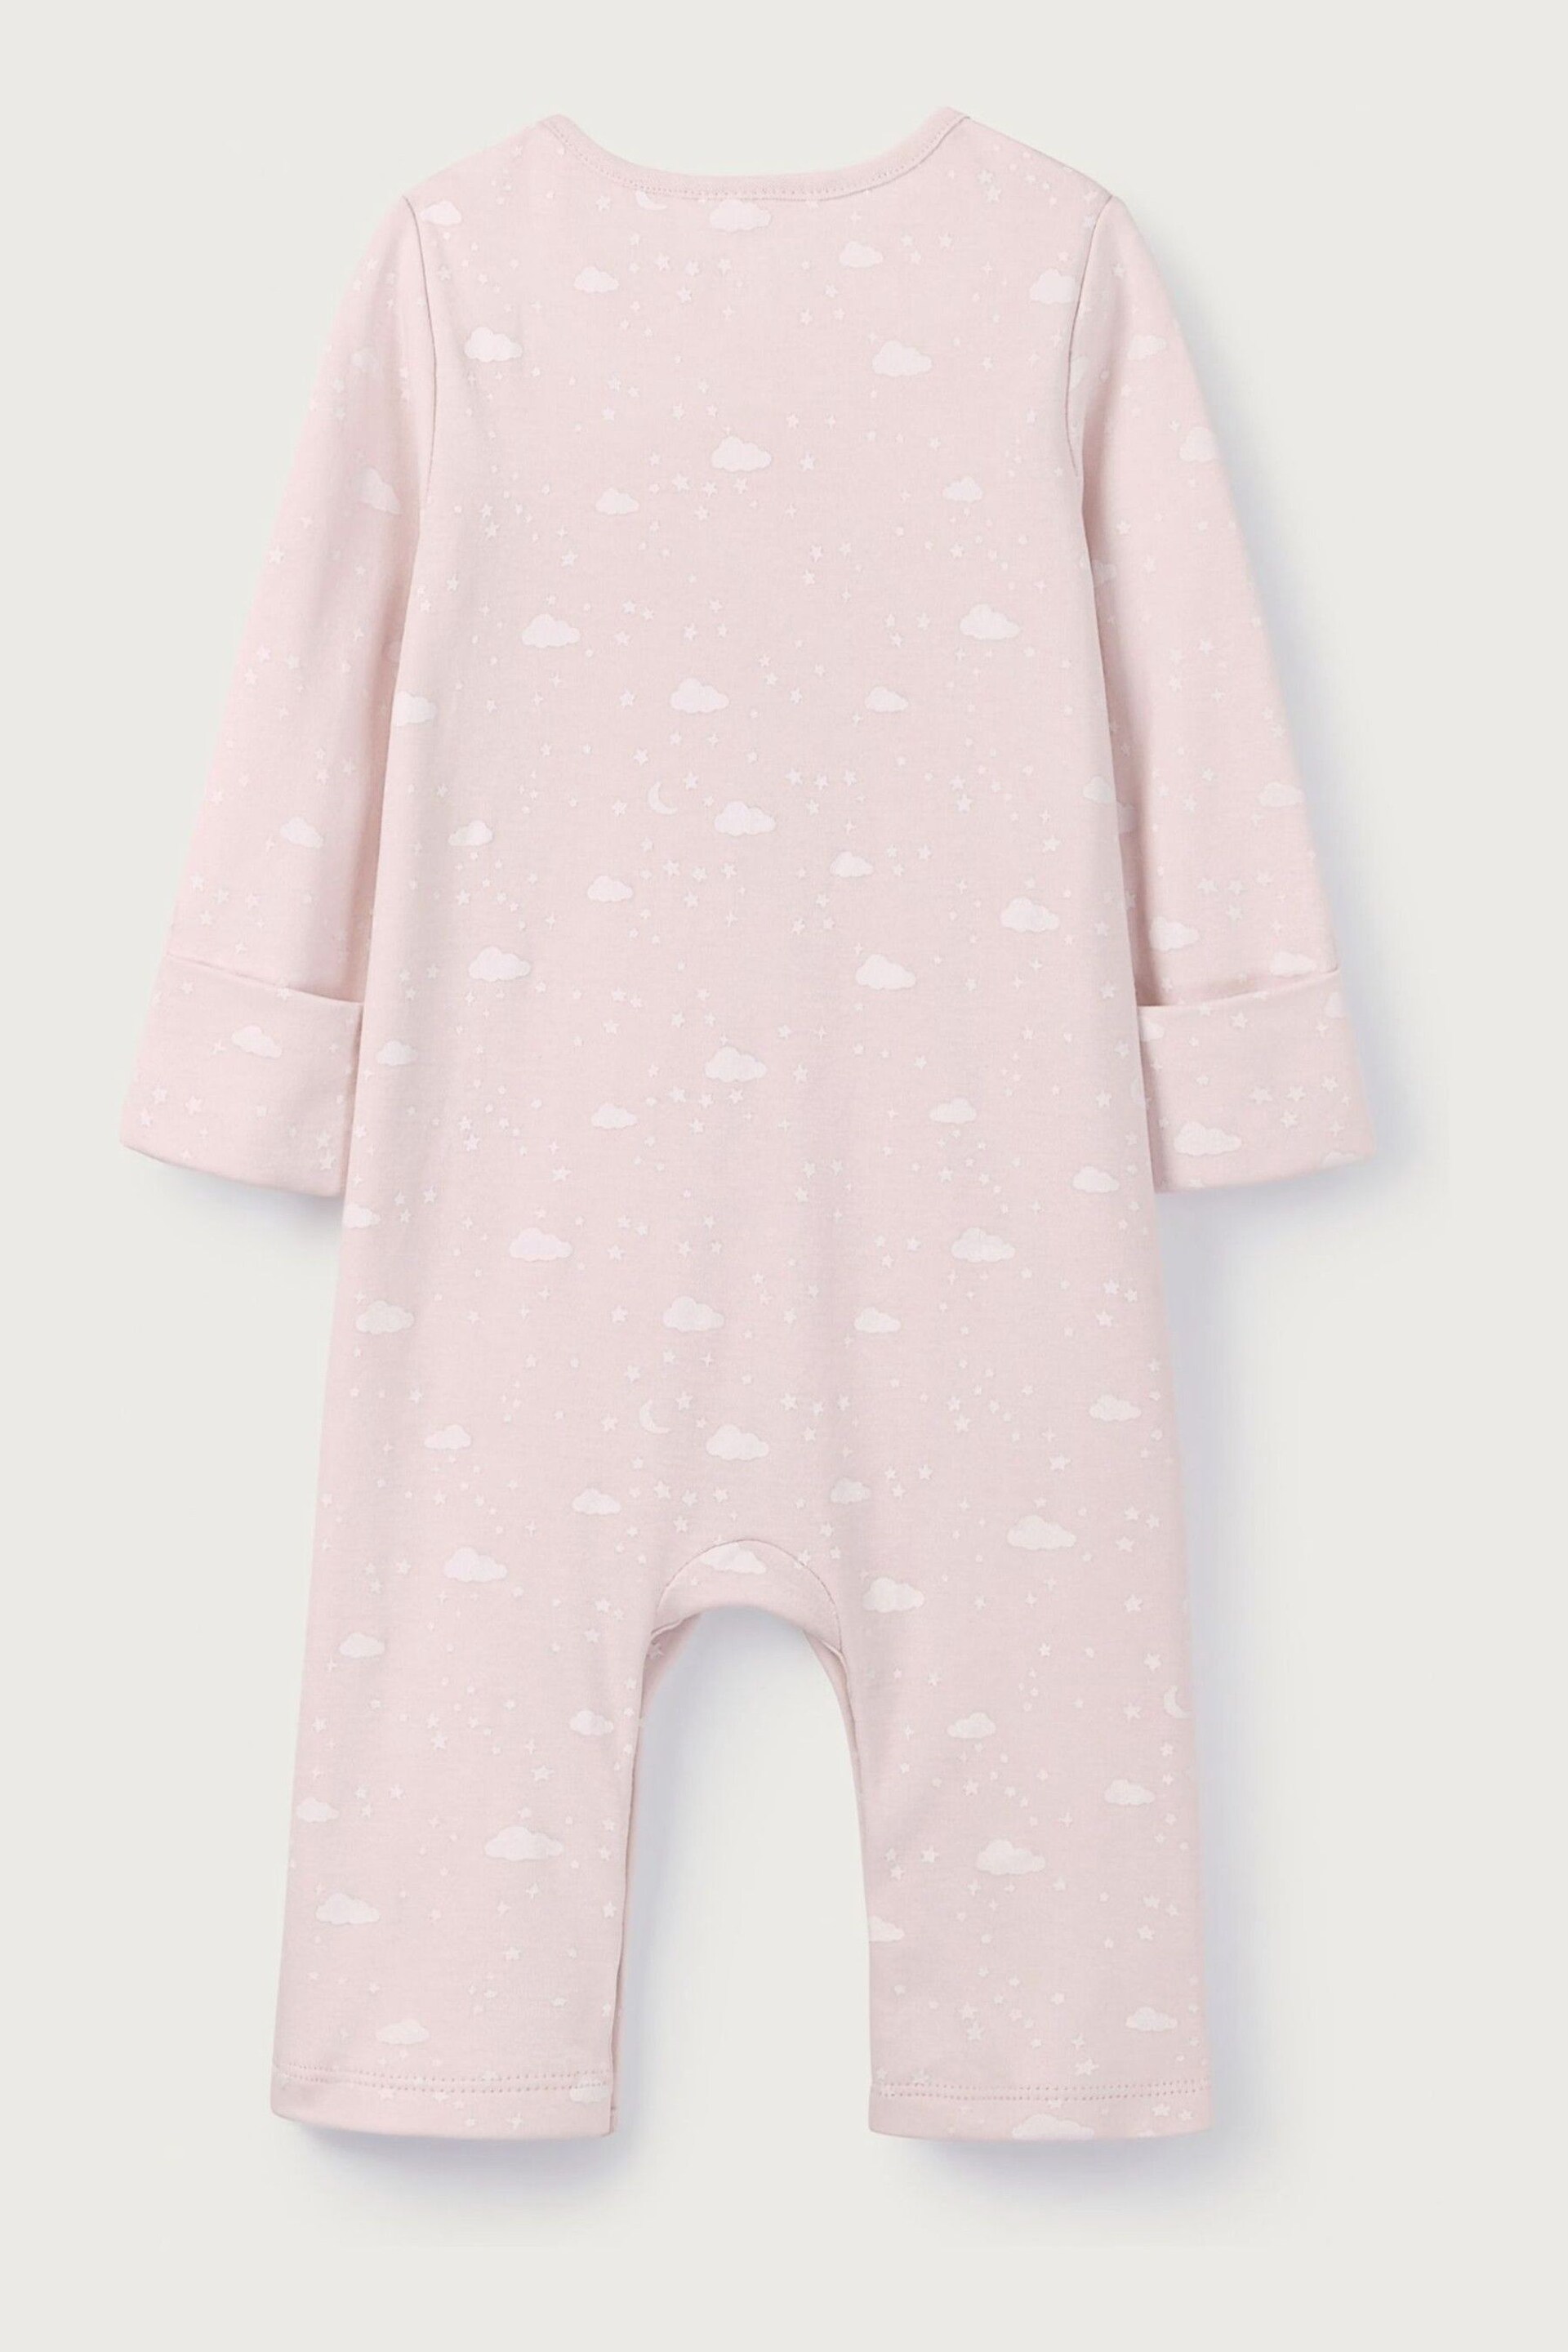 The White Company Pink Organic Cotton Cloud Print Sleepsuit - Image 5 of 5